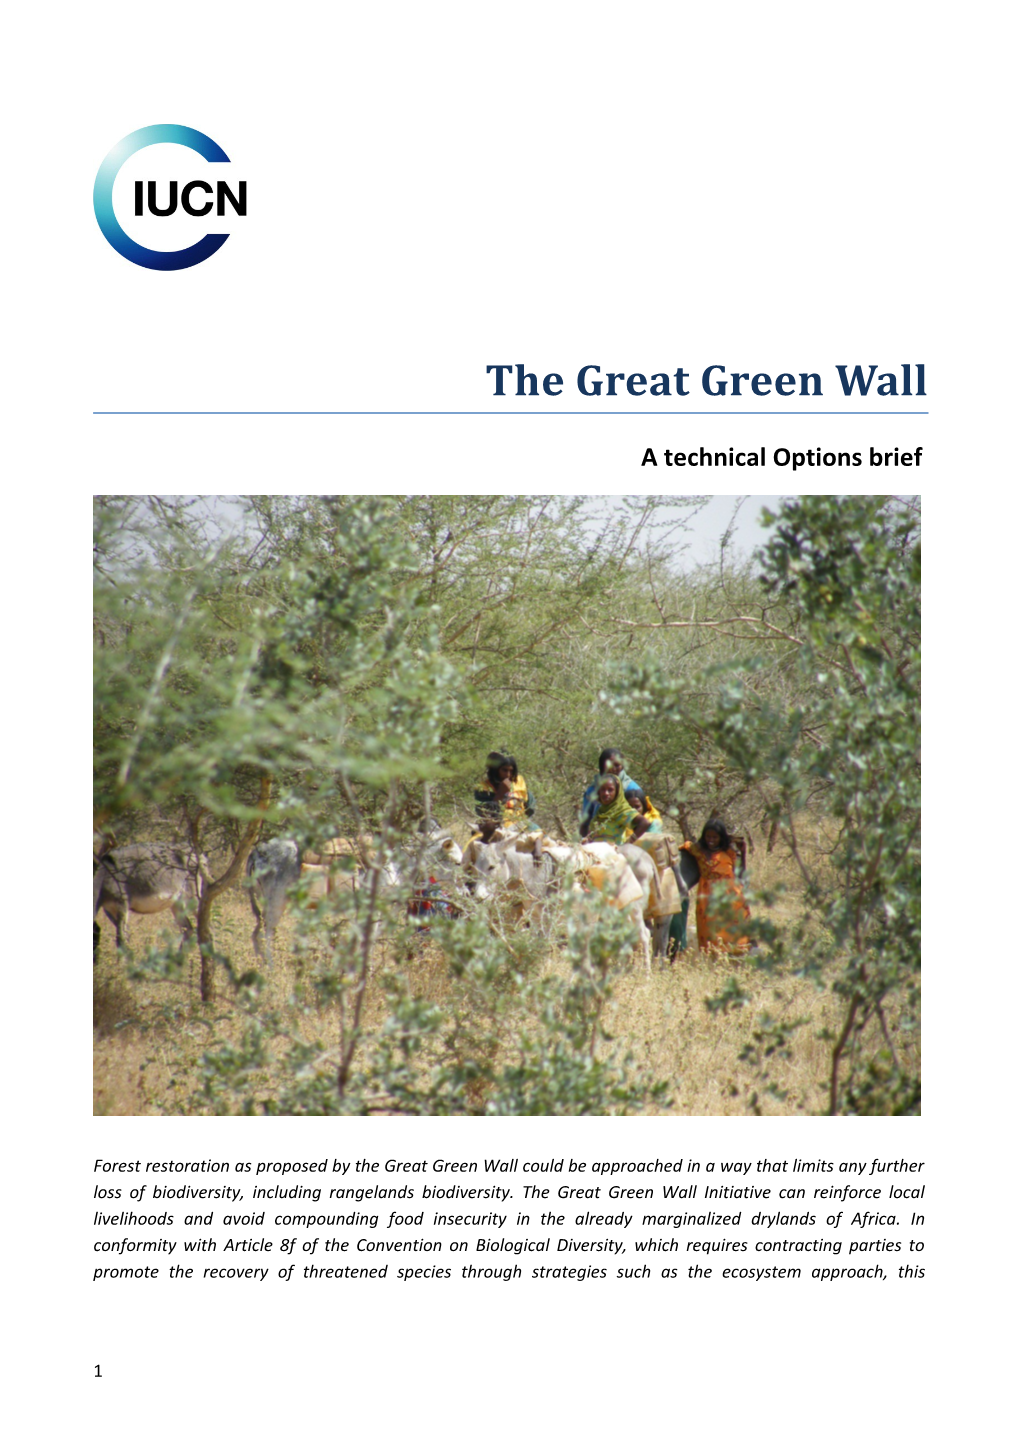 The Great Green Wall: a Technical Options Brief